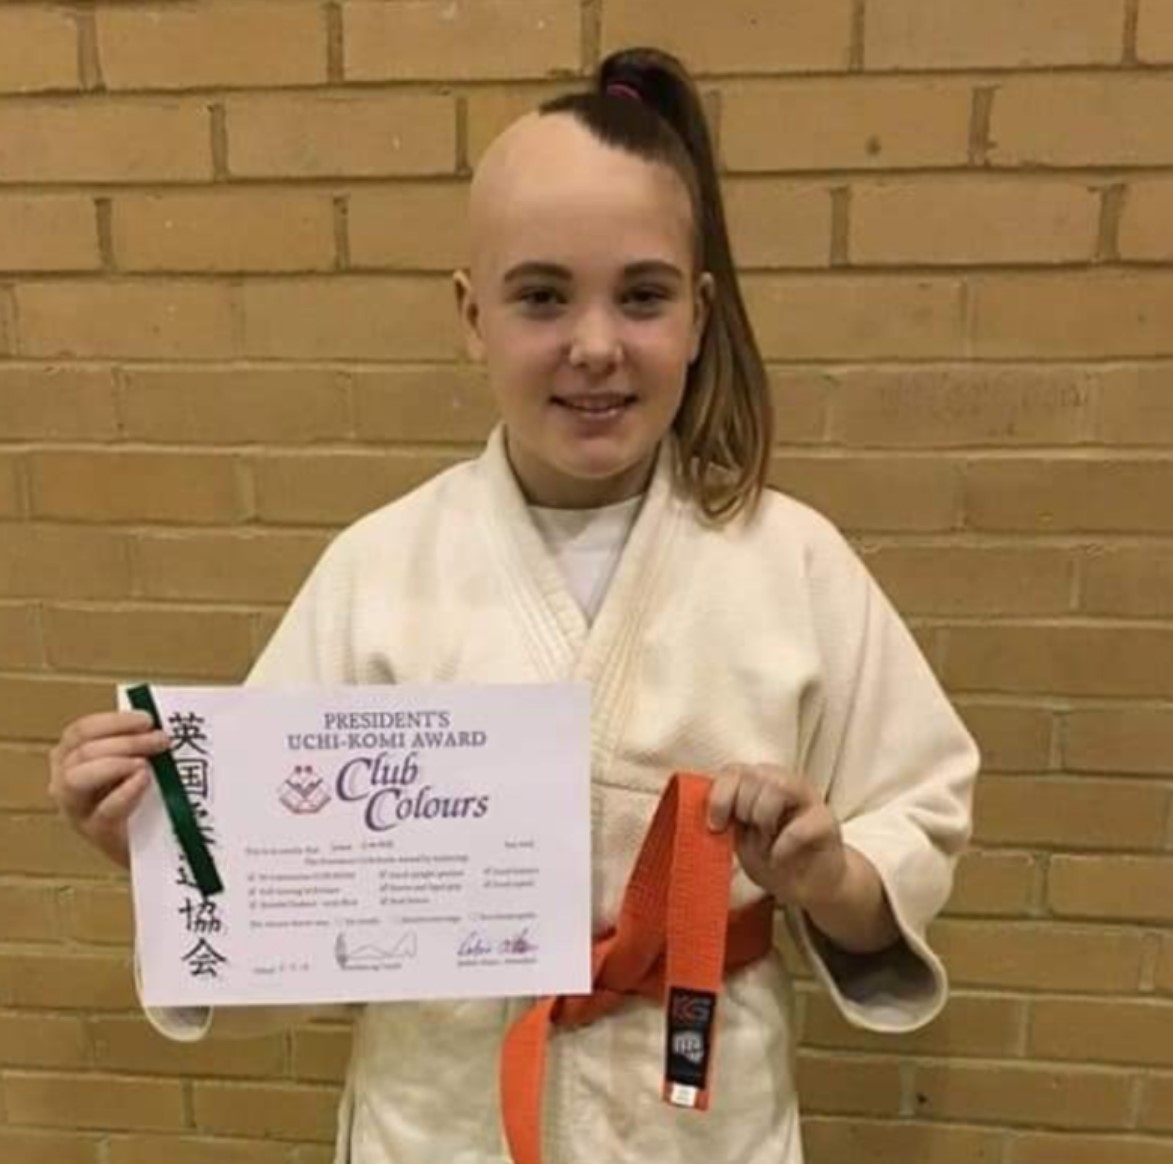 Grace continued to take part in judo while undergoing treatment.